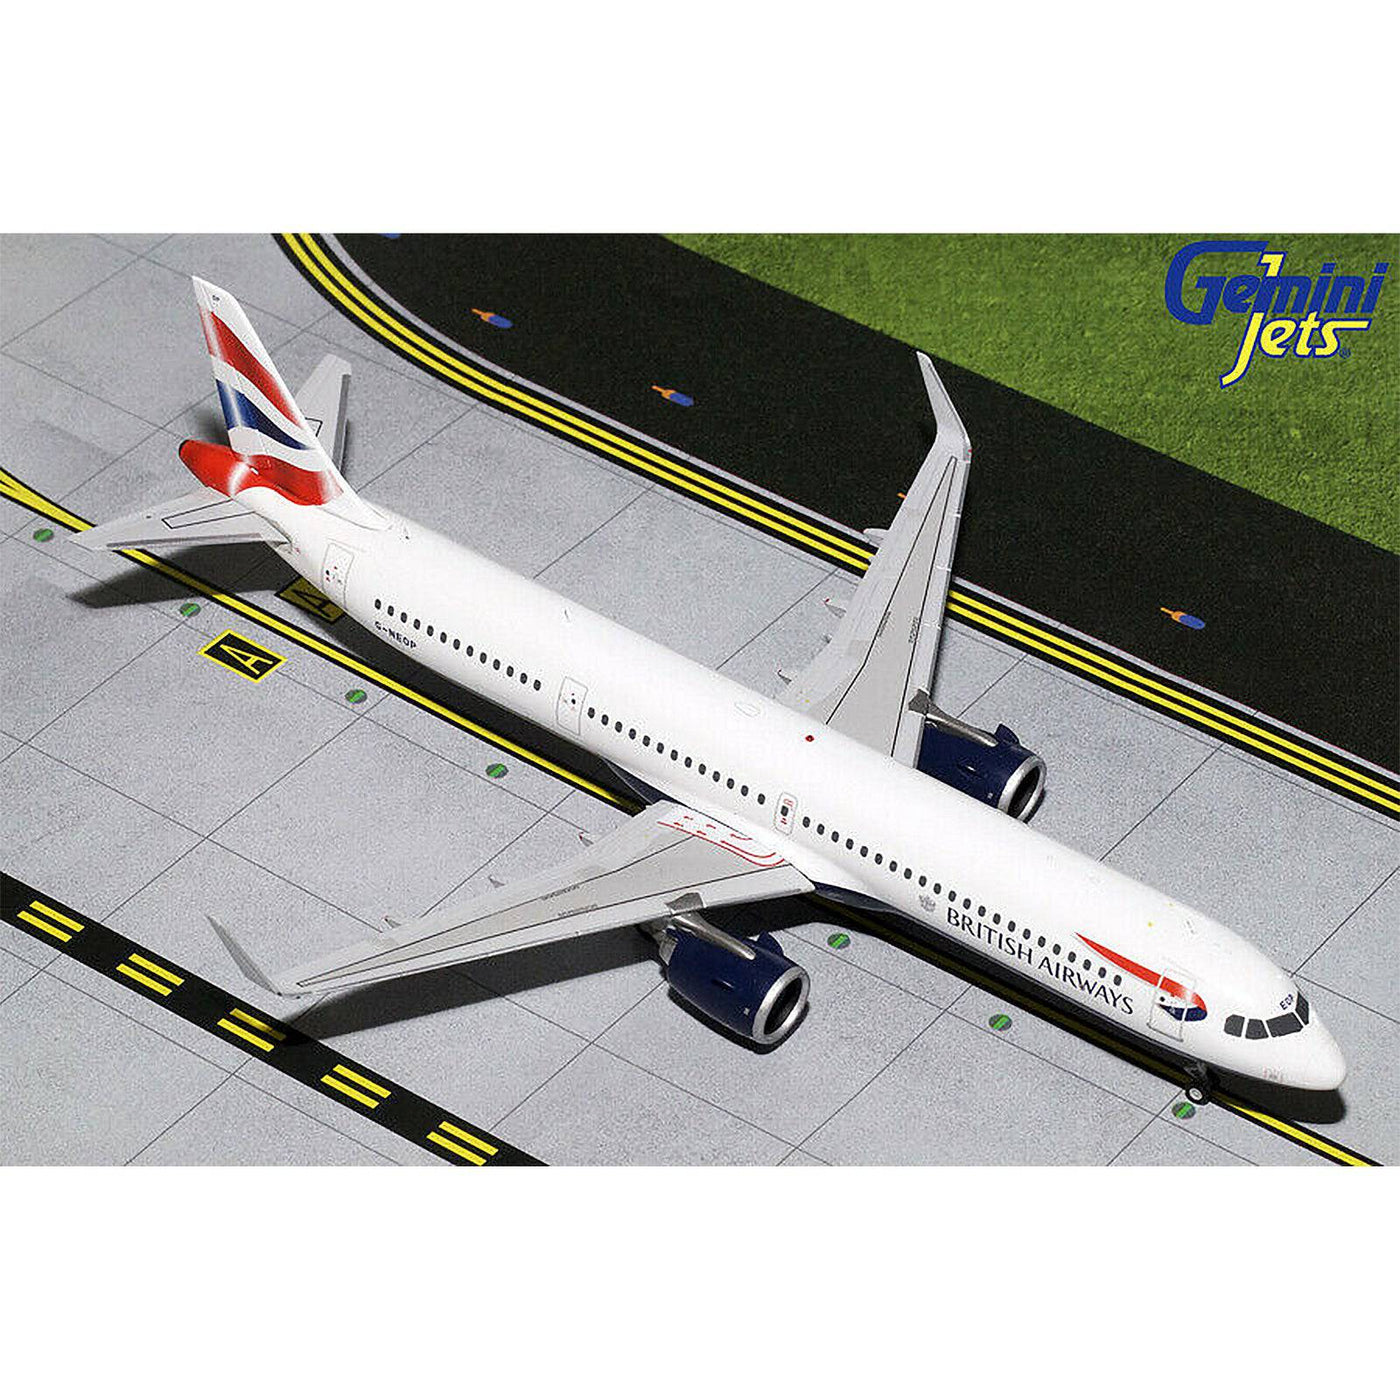 Gemini Jets - 1/200 British Airlines A321neo G-NEOP